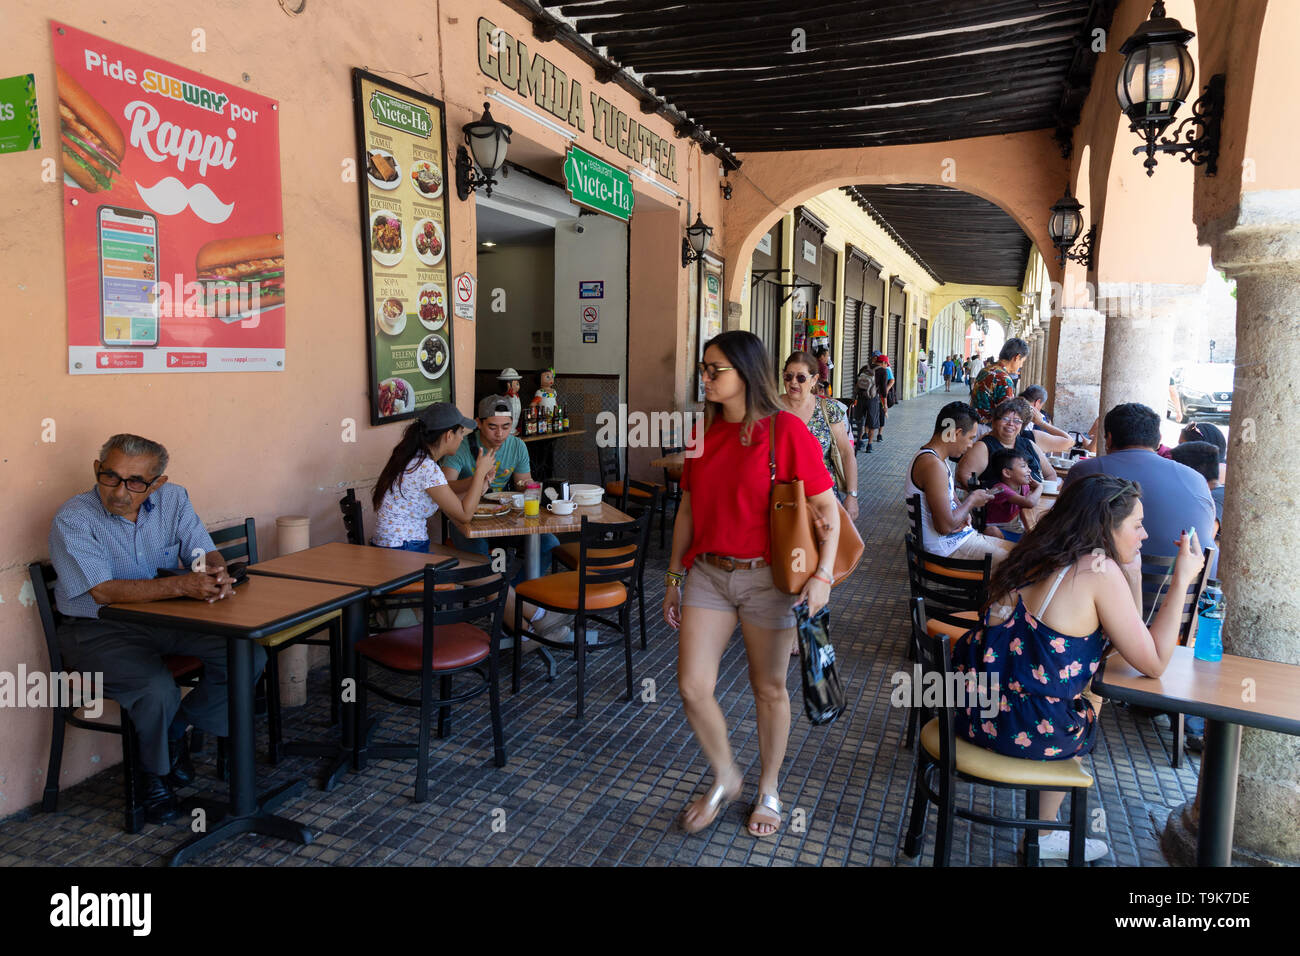 Mexico cafe: tourists and local mexican people mix in a street scene at a cafe, Plaza Grande, Merida Yucatan Mexico Central America - mexico lifestyle Stock Photo